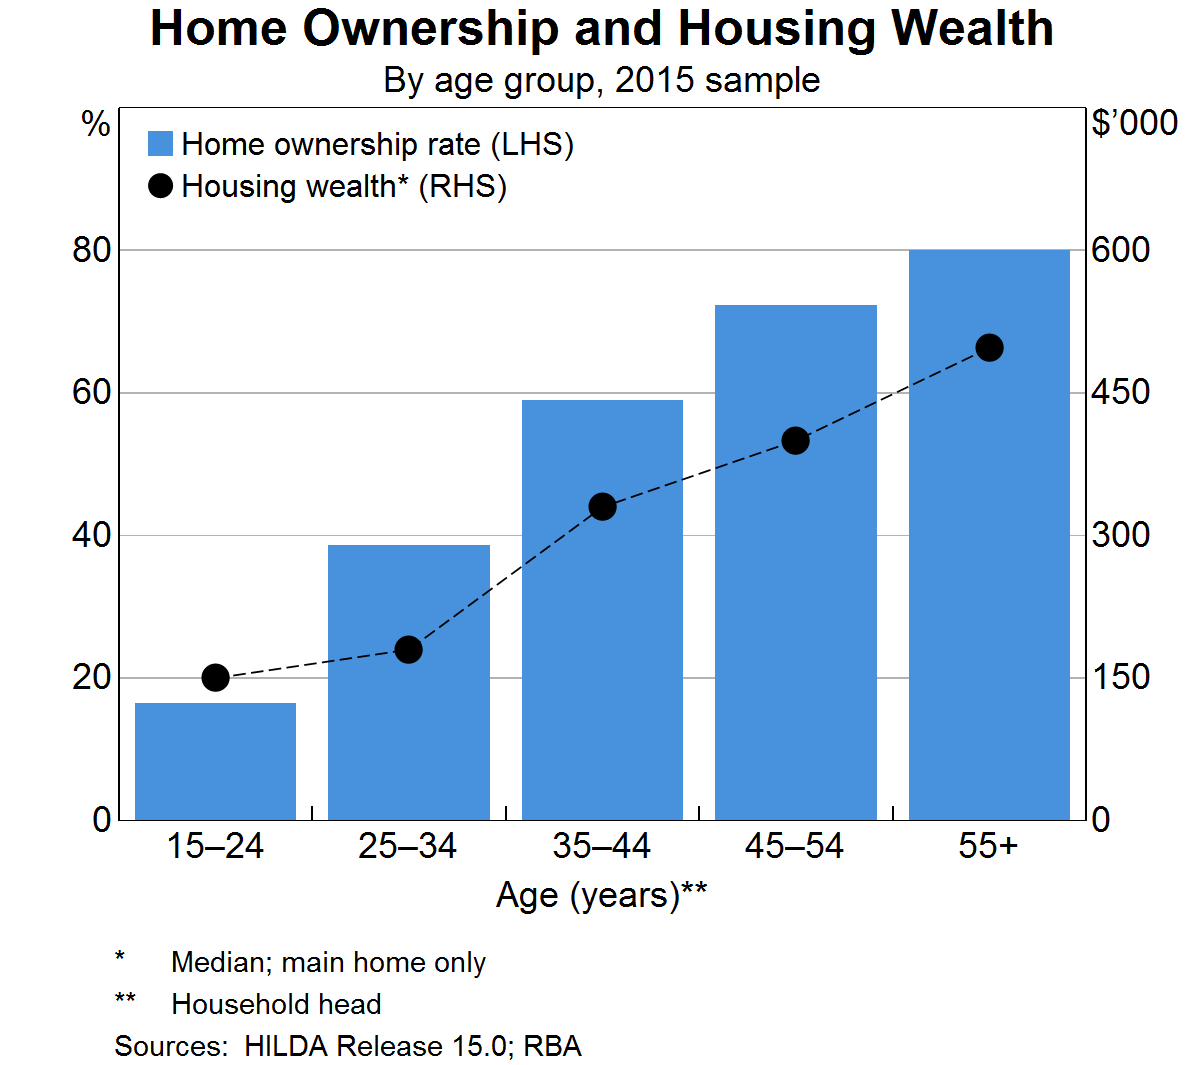 Graph 3: Home Ownership and Housing Wealth (by age group)